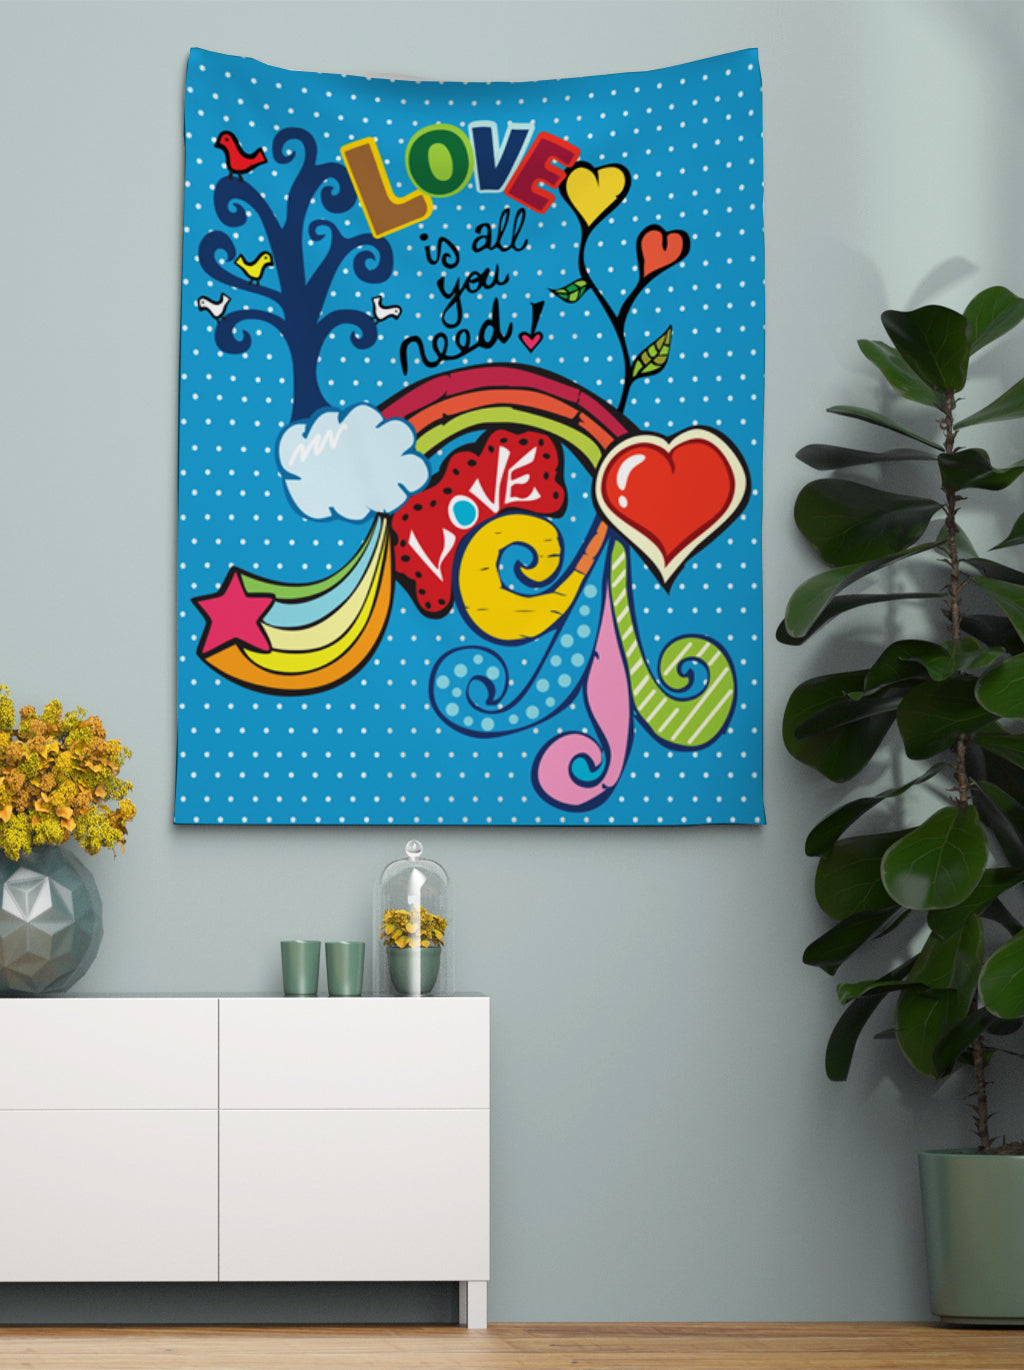 All You Need Is Love Tapestry Love Tapestries Hippy Wall Art Love Artwork Blue Tapestry Kids Children Nursery Decor Cute Tapestries Red Blue